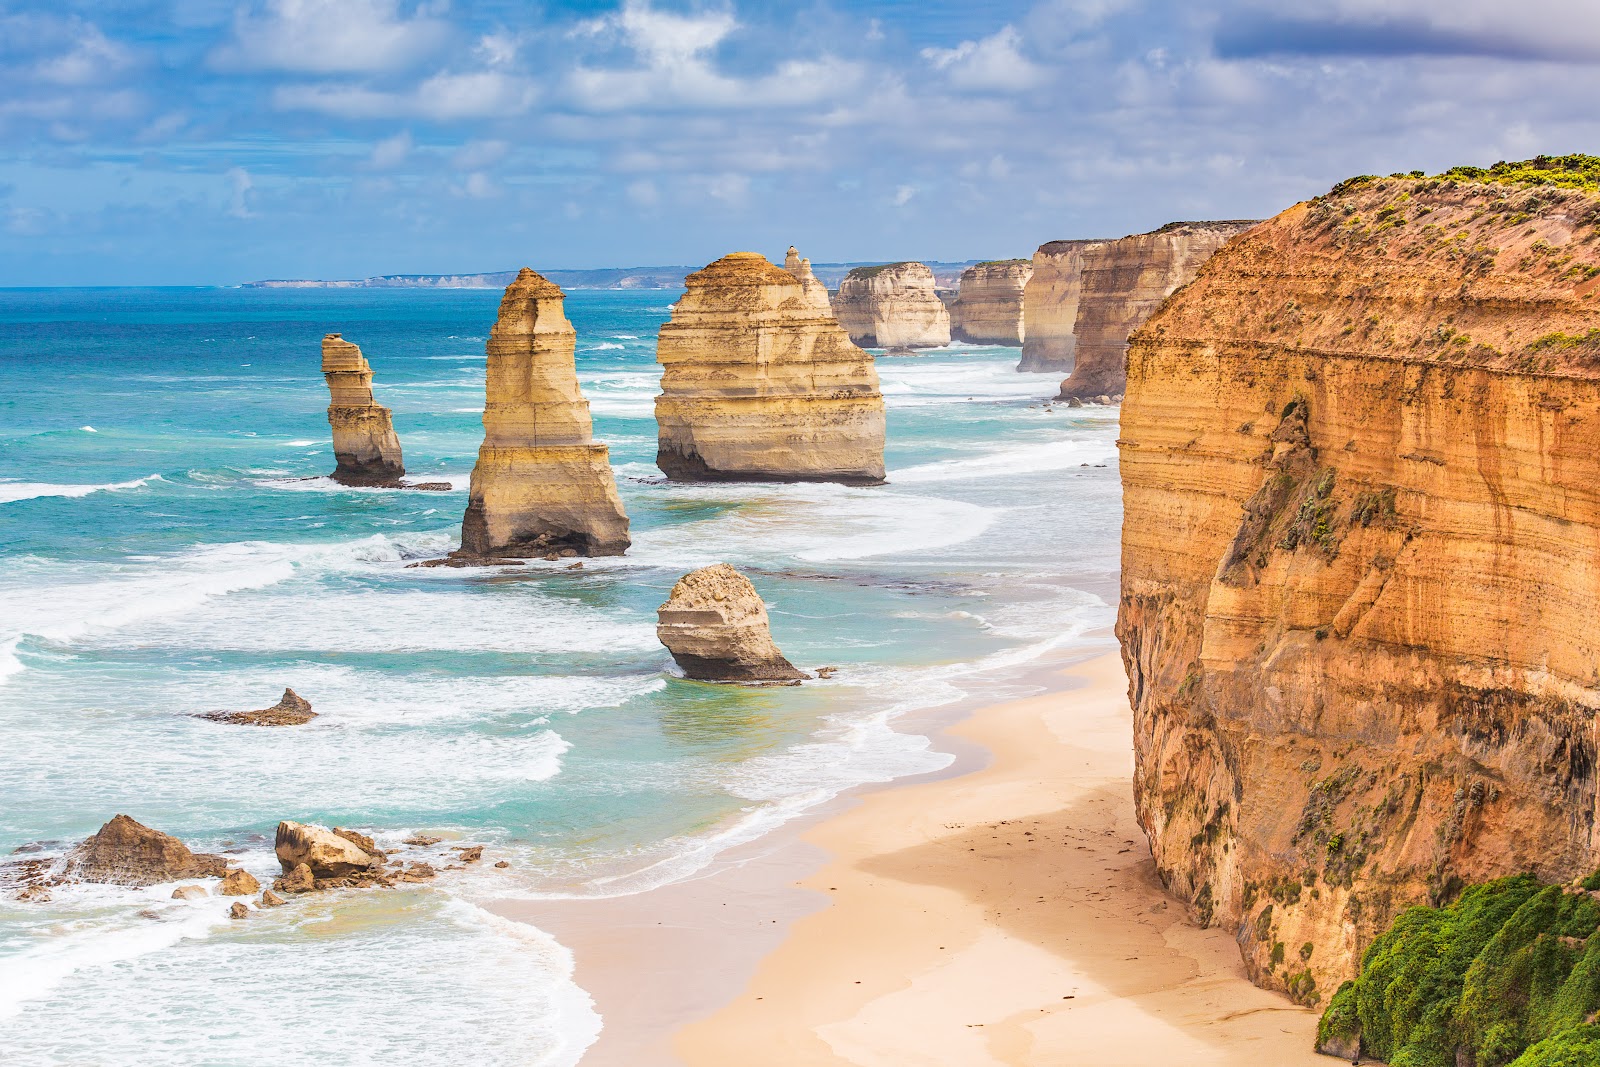 Australia is nearly as large as the continental US. In fact, Melbourne and the Great Ocean Road aren't affected at all. As when any disaster hits, the economy needs a jolt. Let me tell you why you SHOULD visit Australia now.